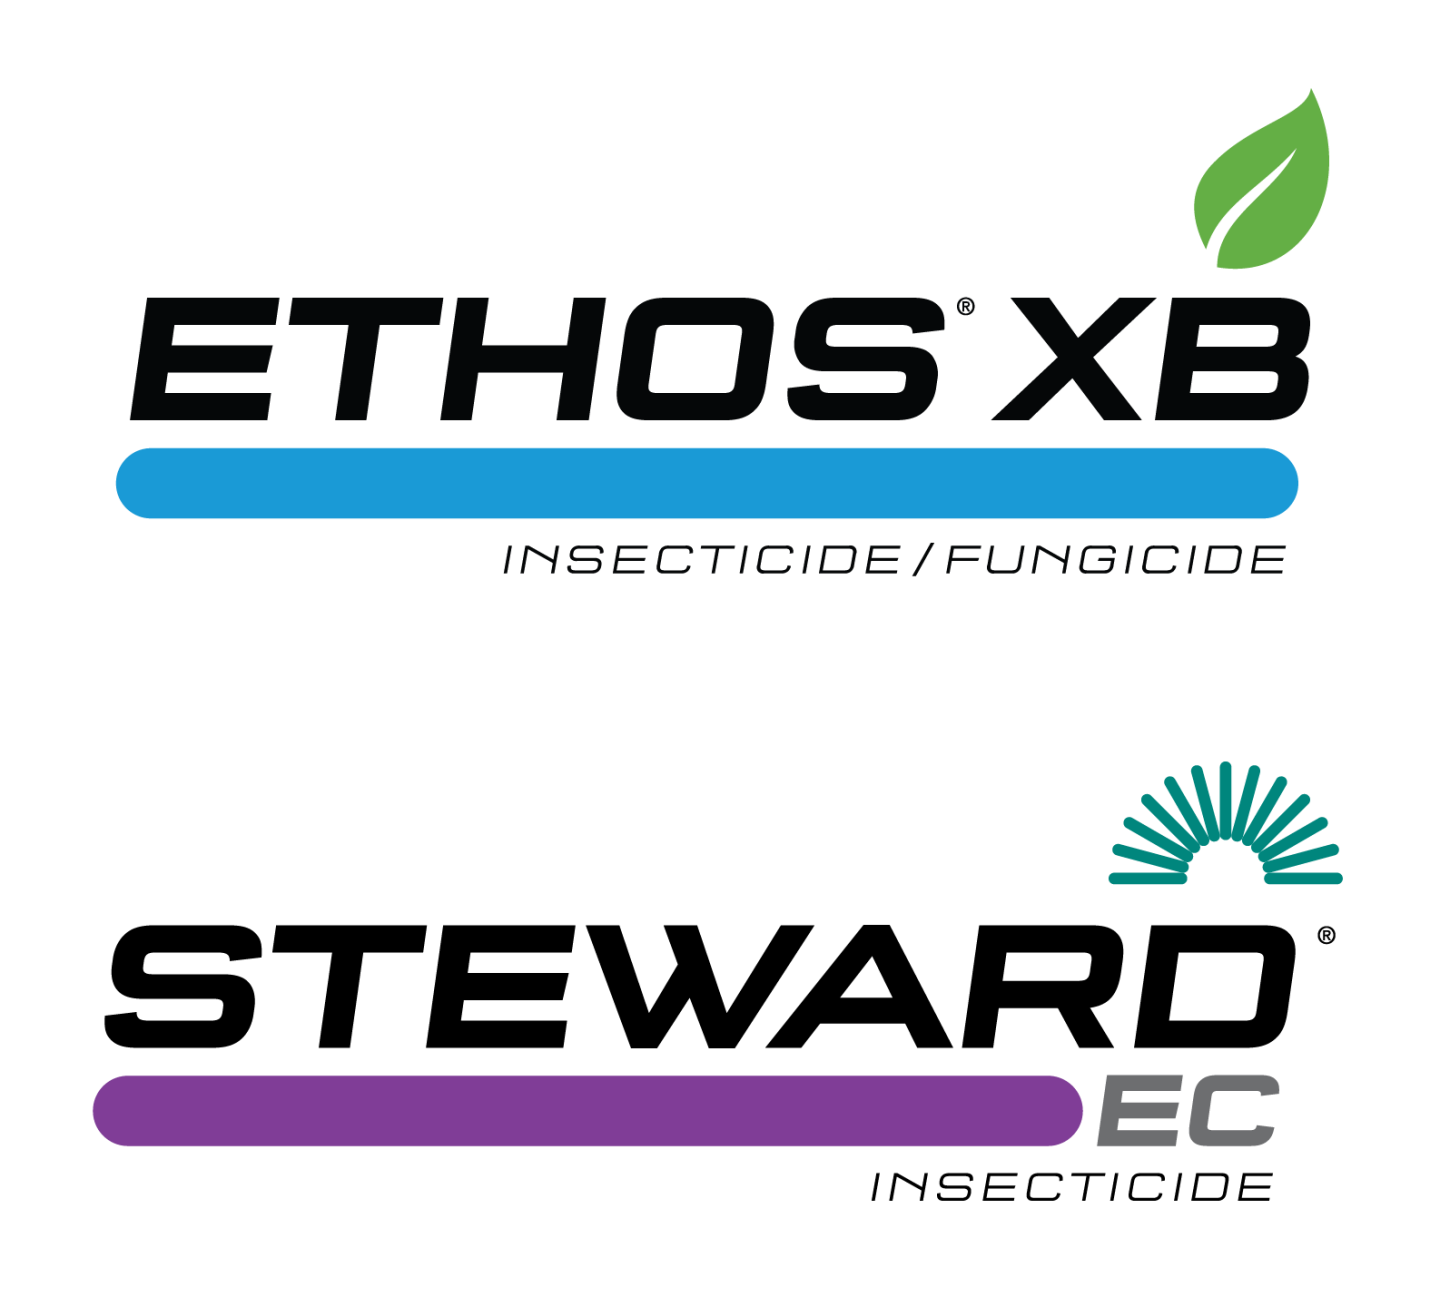 Ethos® XB Insecticide/Fungicide and Steward® EC Insecticide